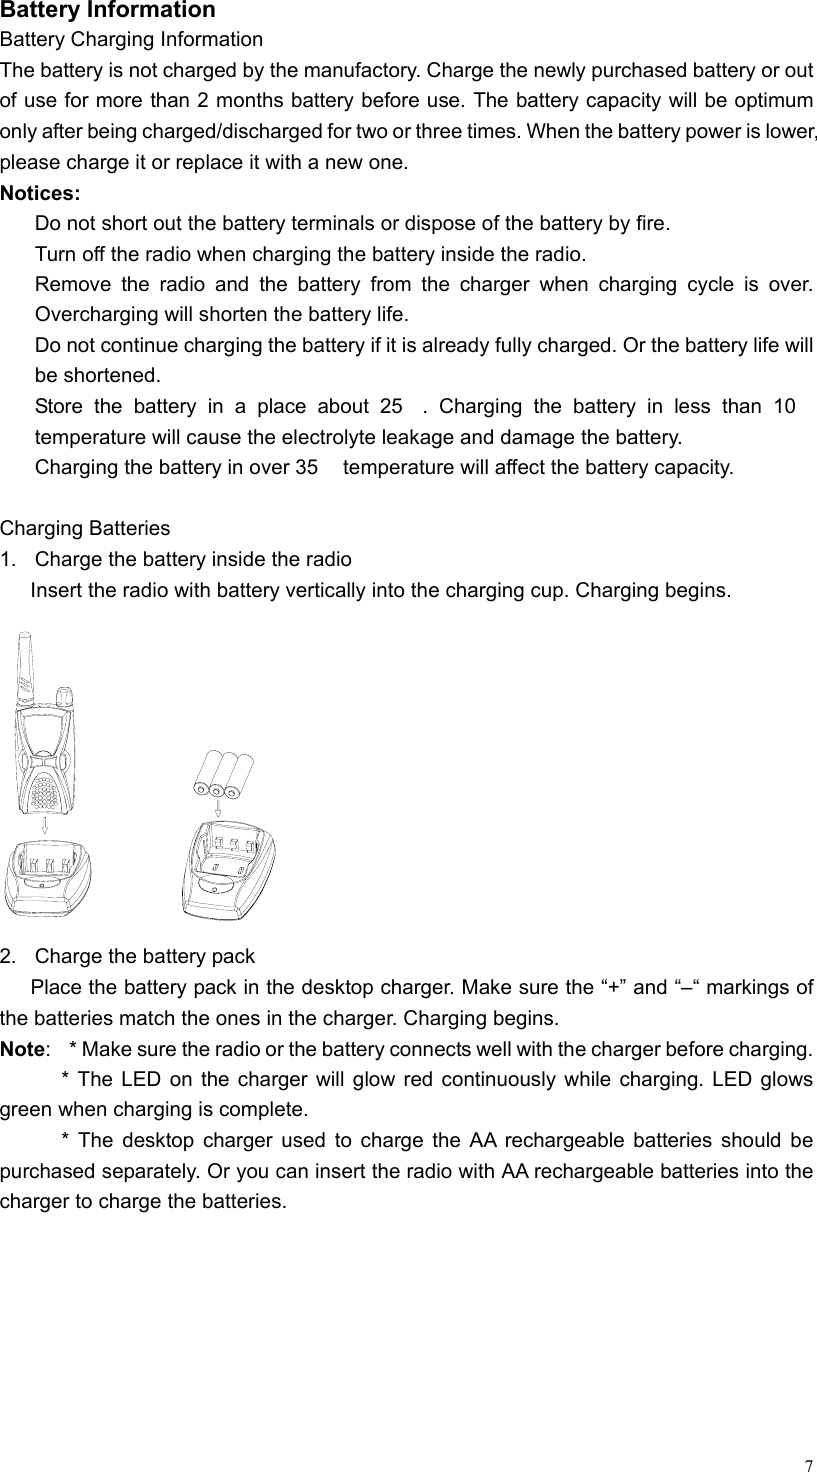   7Battery Information Battery Charging Information The battery is not charged by the manufactory. Charge the newly purchased battery or out of use for more than 2 months battery before use. The battery capacity will be optimum only after being charged/discharged for two or three times. When the battery power is lower, please charge it or replace it with a new one. Notices:   Do not short out the battery terminals or dispose of the battery by fire.     Turn off the radio when charging the battery inside the radio.   Remove the radio and the battery from the charger when charging cycle is over. Overcharging will shorten the battery life.   Do not continue charging the battery if it is already fully charged. Or the battery life will be shortened.   Store the battery in a place about 25. Charging the battery in less than 10 temperature will cause the electrolyte leakage and damage the battery.   Charging the battery in over 35  temperature will affect the battery capacity.  Charging Batteries   1.  Charge the battery inside the radio   Insert the radio with battery vertically into the charging cup. Charging begins.  2.  Charge the battery pack   Place the battery pack in the desktop charger. Make sure the “+” and “–“ markings of the batteries match the ones in the charger. Charging begins.   Note:    * Make sure the radio or the battery connects well with the charger before charging. * The LED on the charger will glow red continuously while charging. LED glows green when charging is complete. * The desktop charger used to charge the AA rechargeable batteries should be purchased separately. Or you can insert the radio with AA rechargeable batteries into the charger to charge the batteries.    